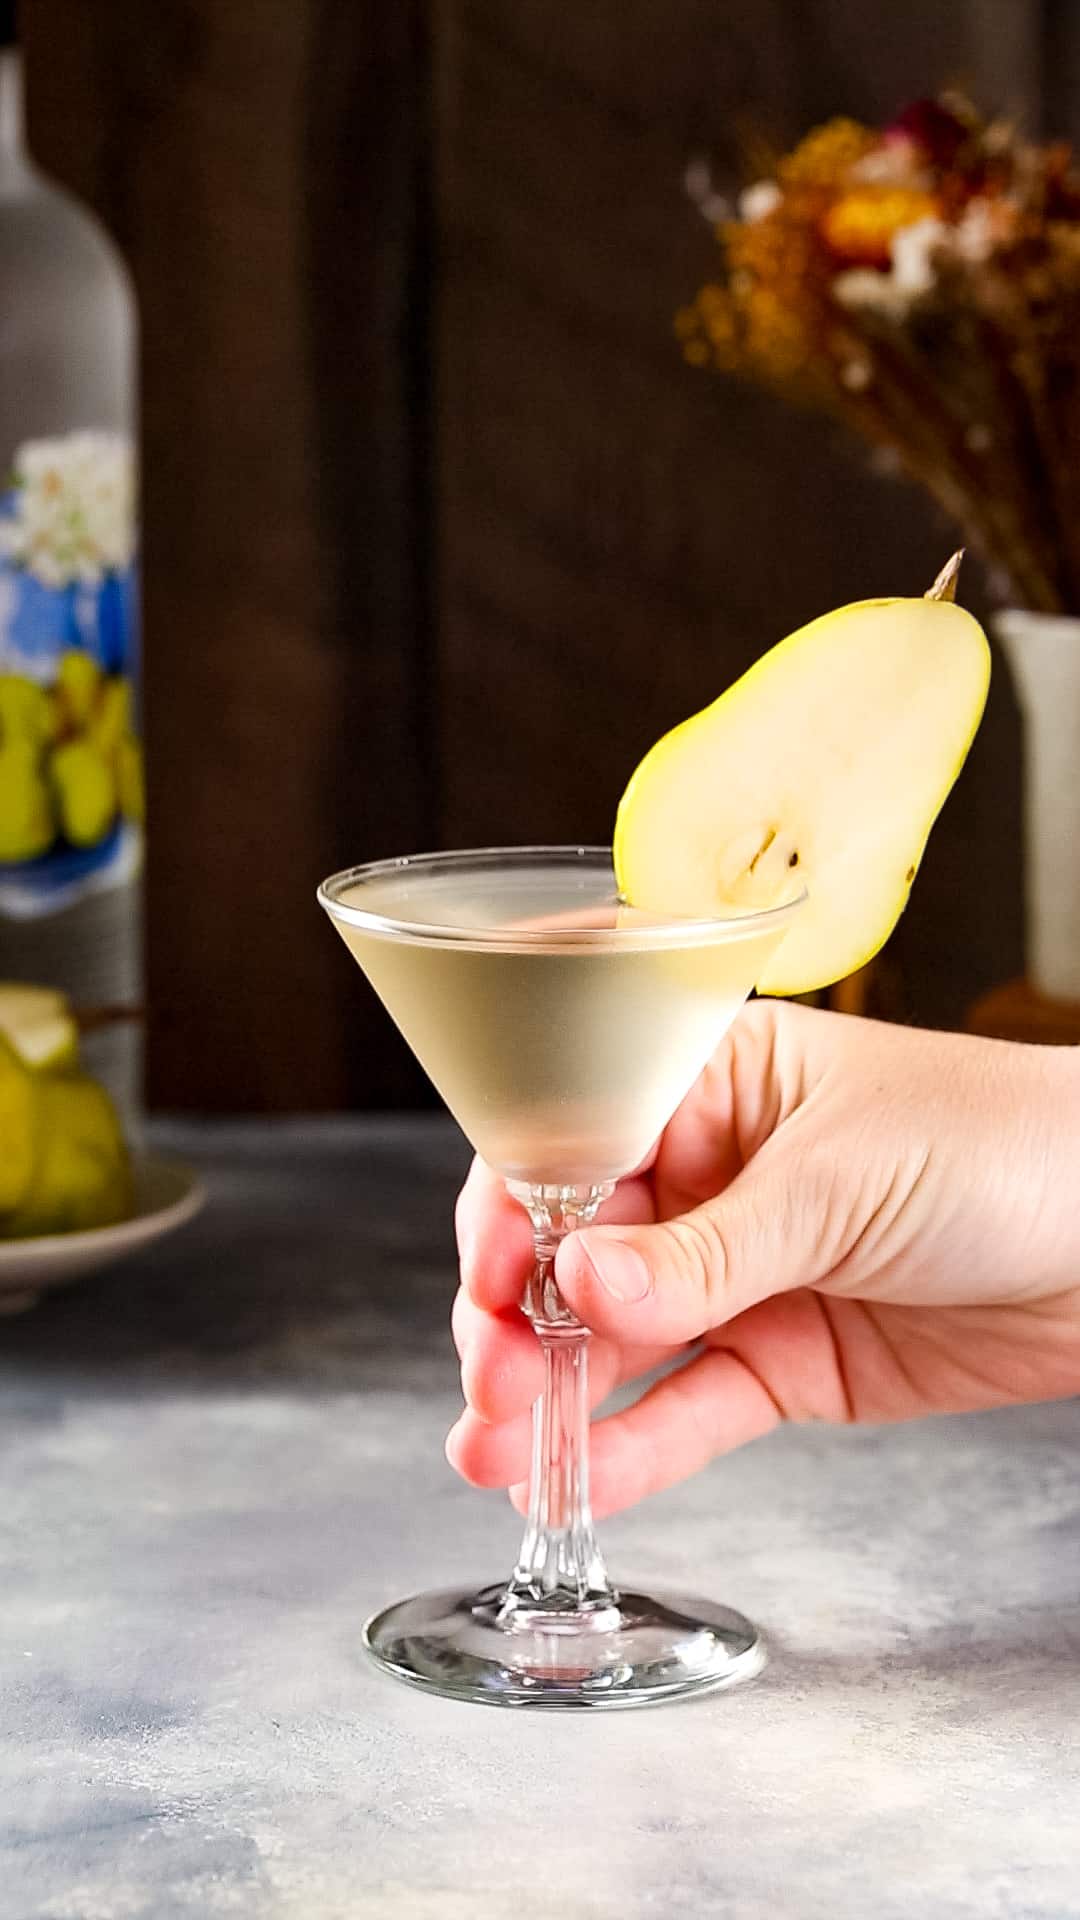 Hand about to pick up a martini glass filled with a light yellow liquid that has a fresh pear slice as a garnish.